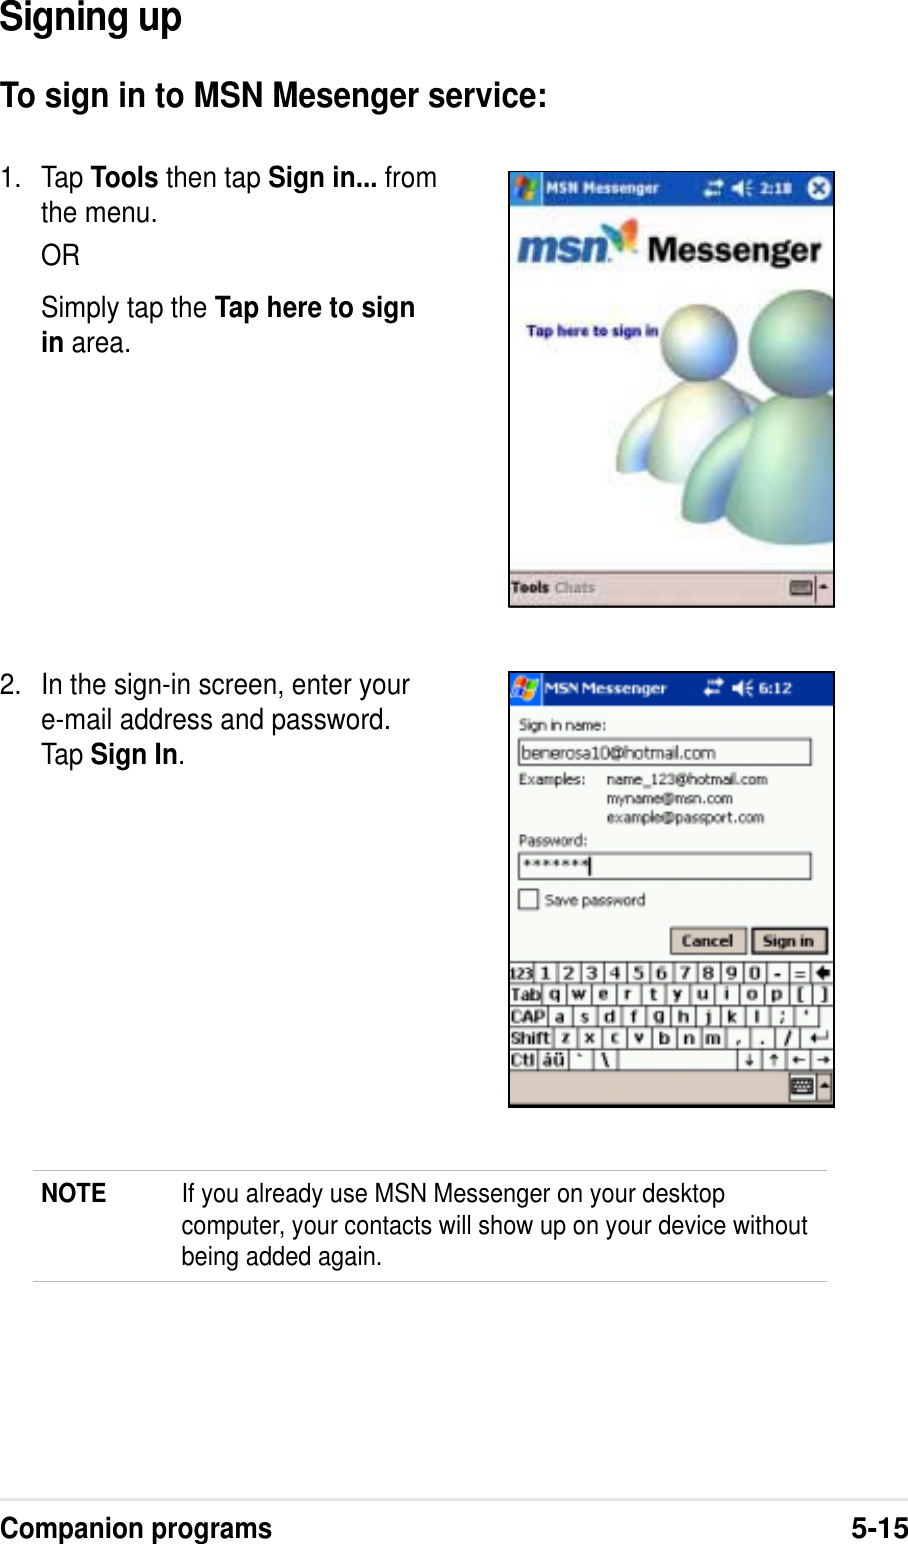 Companion programs5-15Signing upTo sign in to MSN Mesenger service:NOTE If you already use MSN Messenger on your desktopcomputer, your contacts will show up on your device withoutbeing added again.1. Tap Tools then tap Sign in... fromthe menu.ORSimply tap the Tap here to signin area.2. In the sign-in screen, enter youre-mail address and password.Tap Sign In.